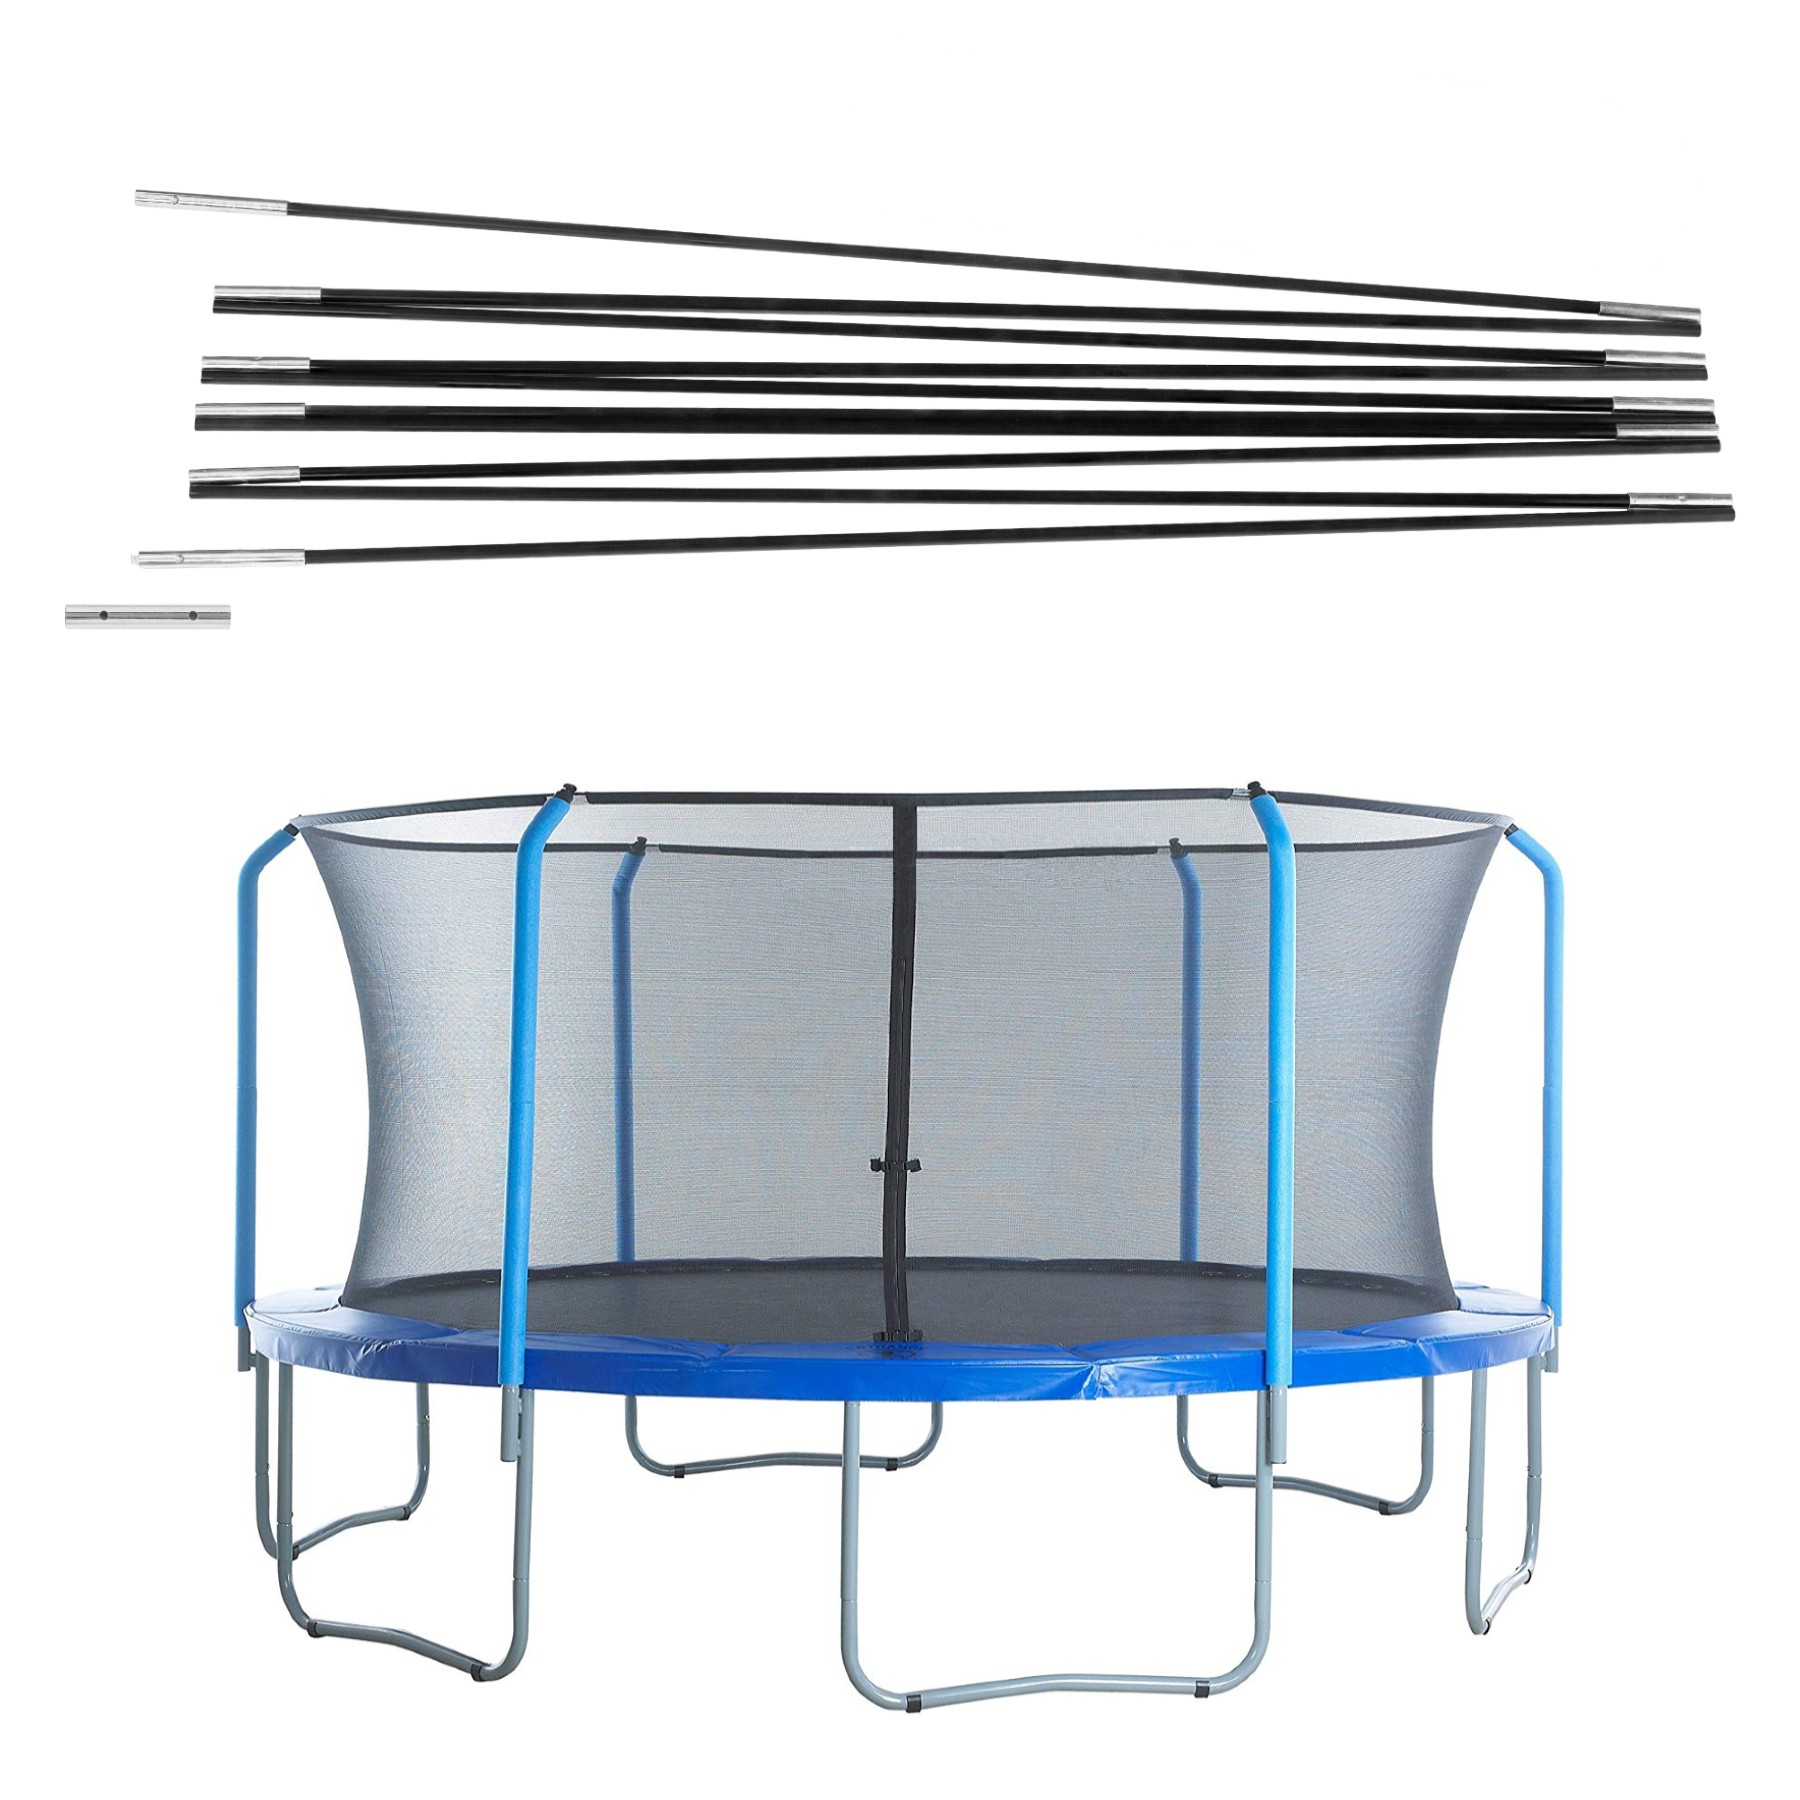 Universal Trampoline Fibreglass Rods to Replace the Top Ring of Net Enclosure for 8 FT. Frame - Pole Caps Included